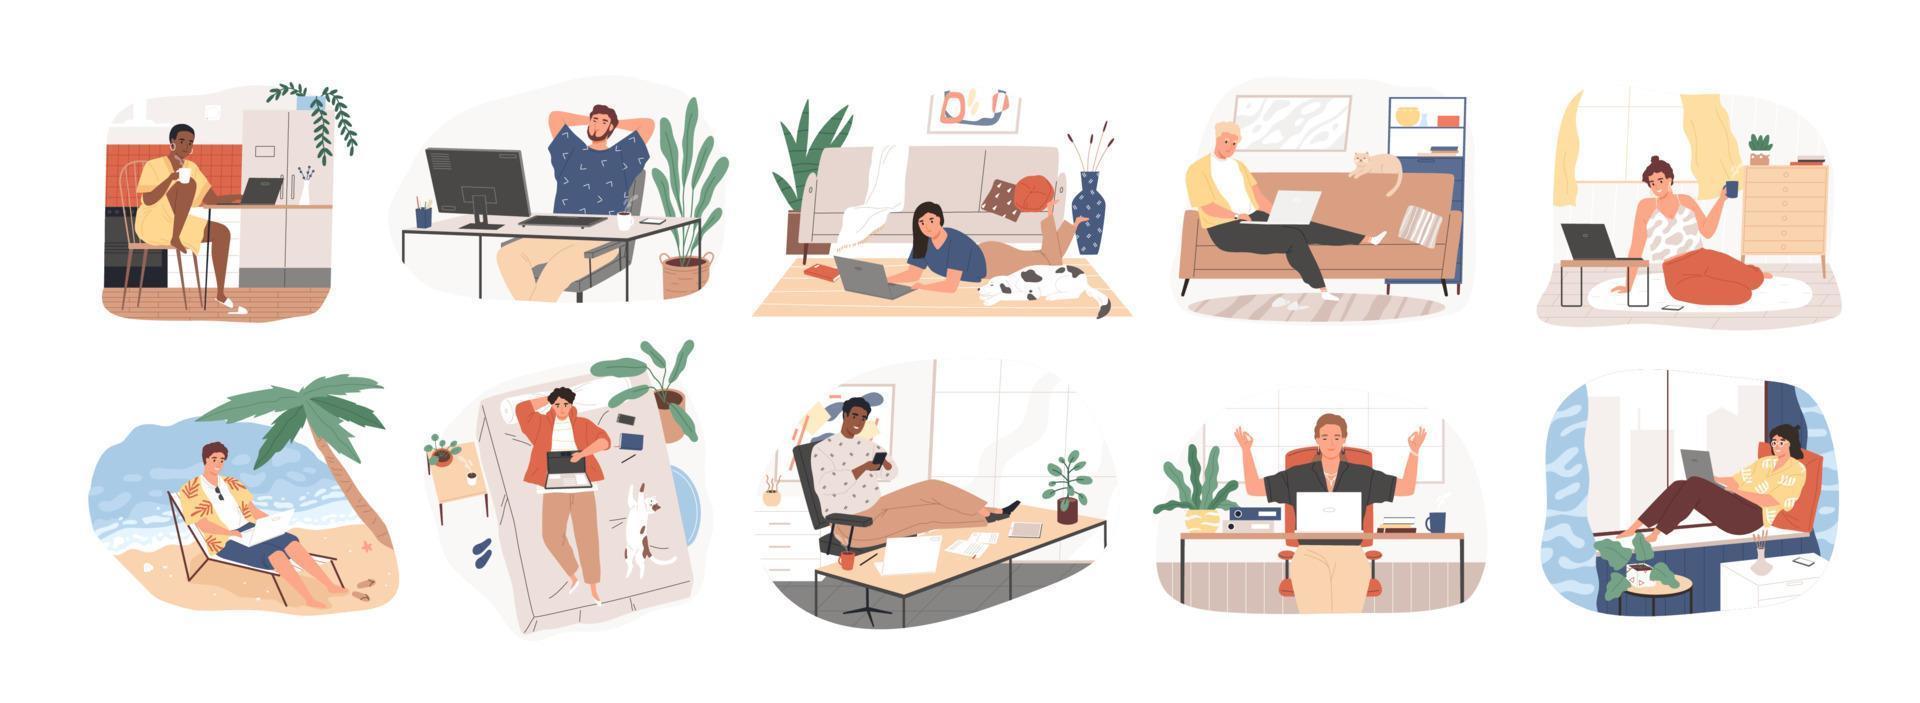 Freelance people work in comfortable conditions set vector flat illustration. Freelancer character working from home or beach at relaxed pace, convenient workplace. Man and woman self employed concept